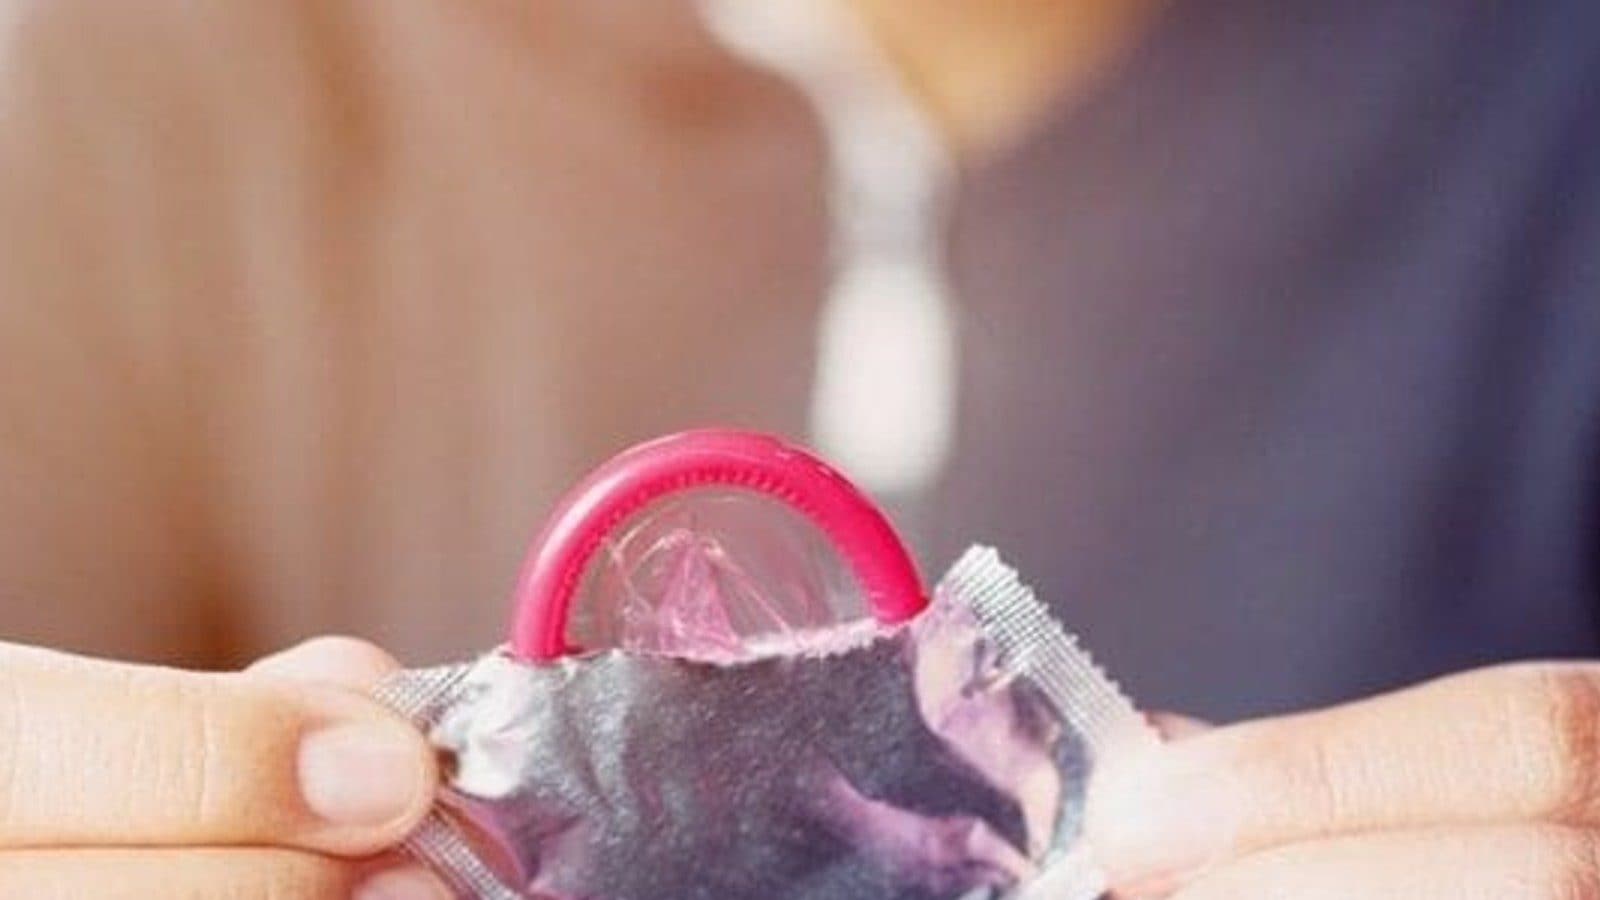 Removing Condom Without Permission During Sex Now Illegal in California Know More image pic